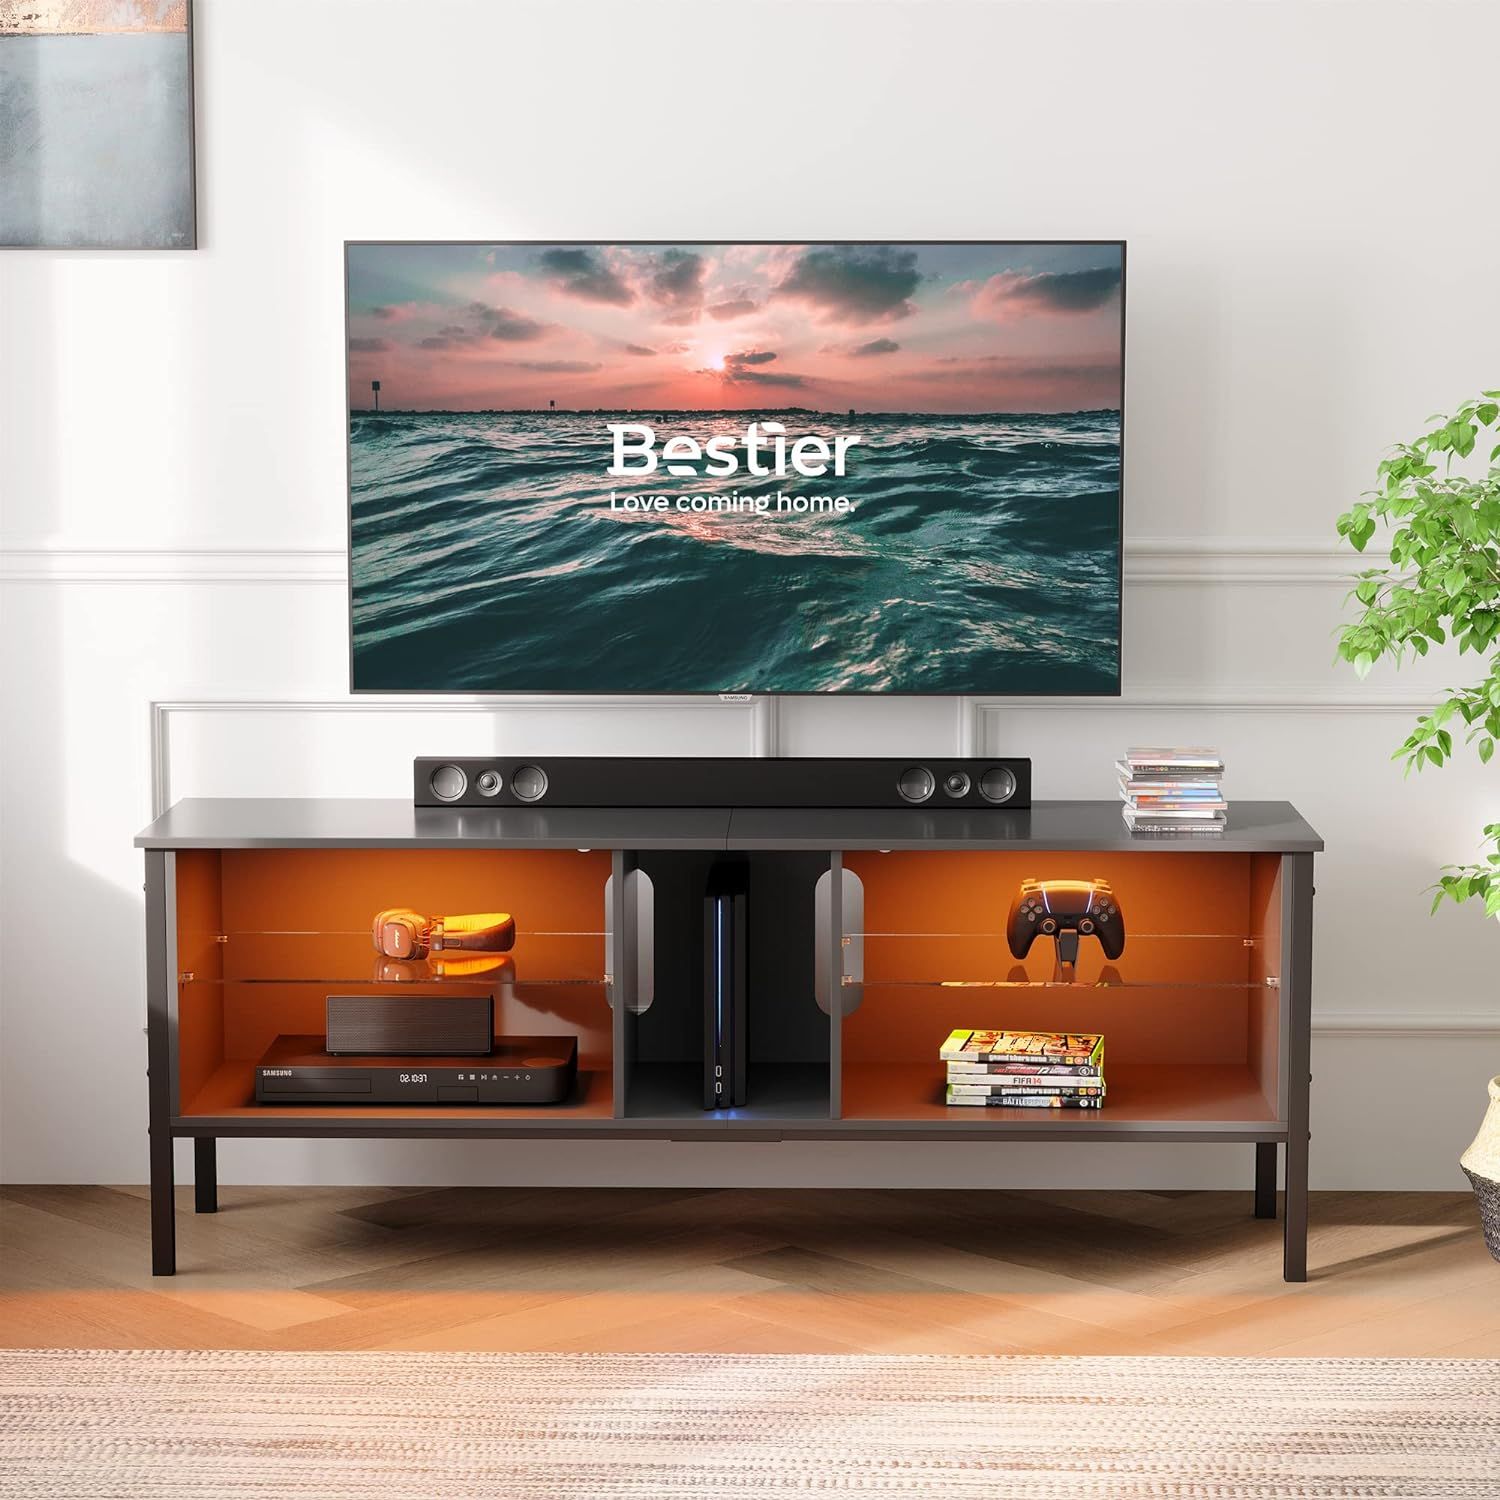 Bestier Tv Stand For 70 Inch Tv, Large Gaming Nepal | Ubuy Intended For Bestier Tv Stand For Tvs Up To 75" (Photo 11 of 15)